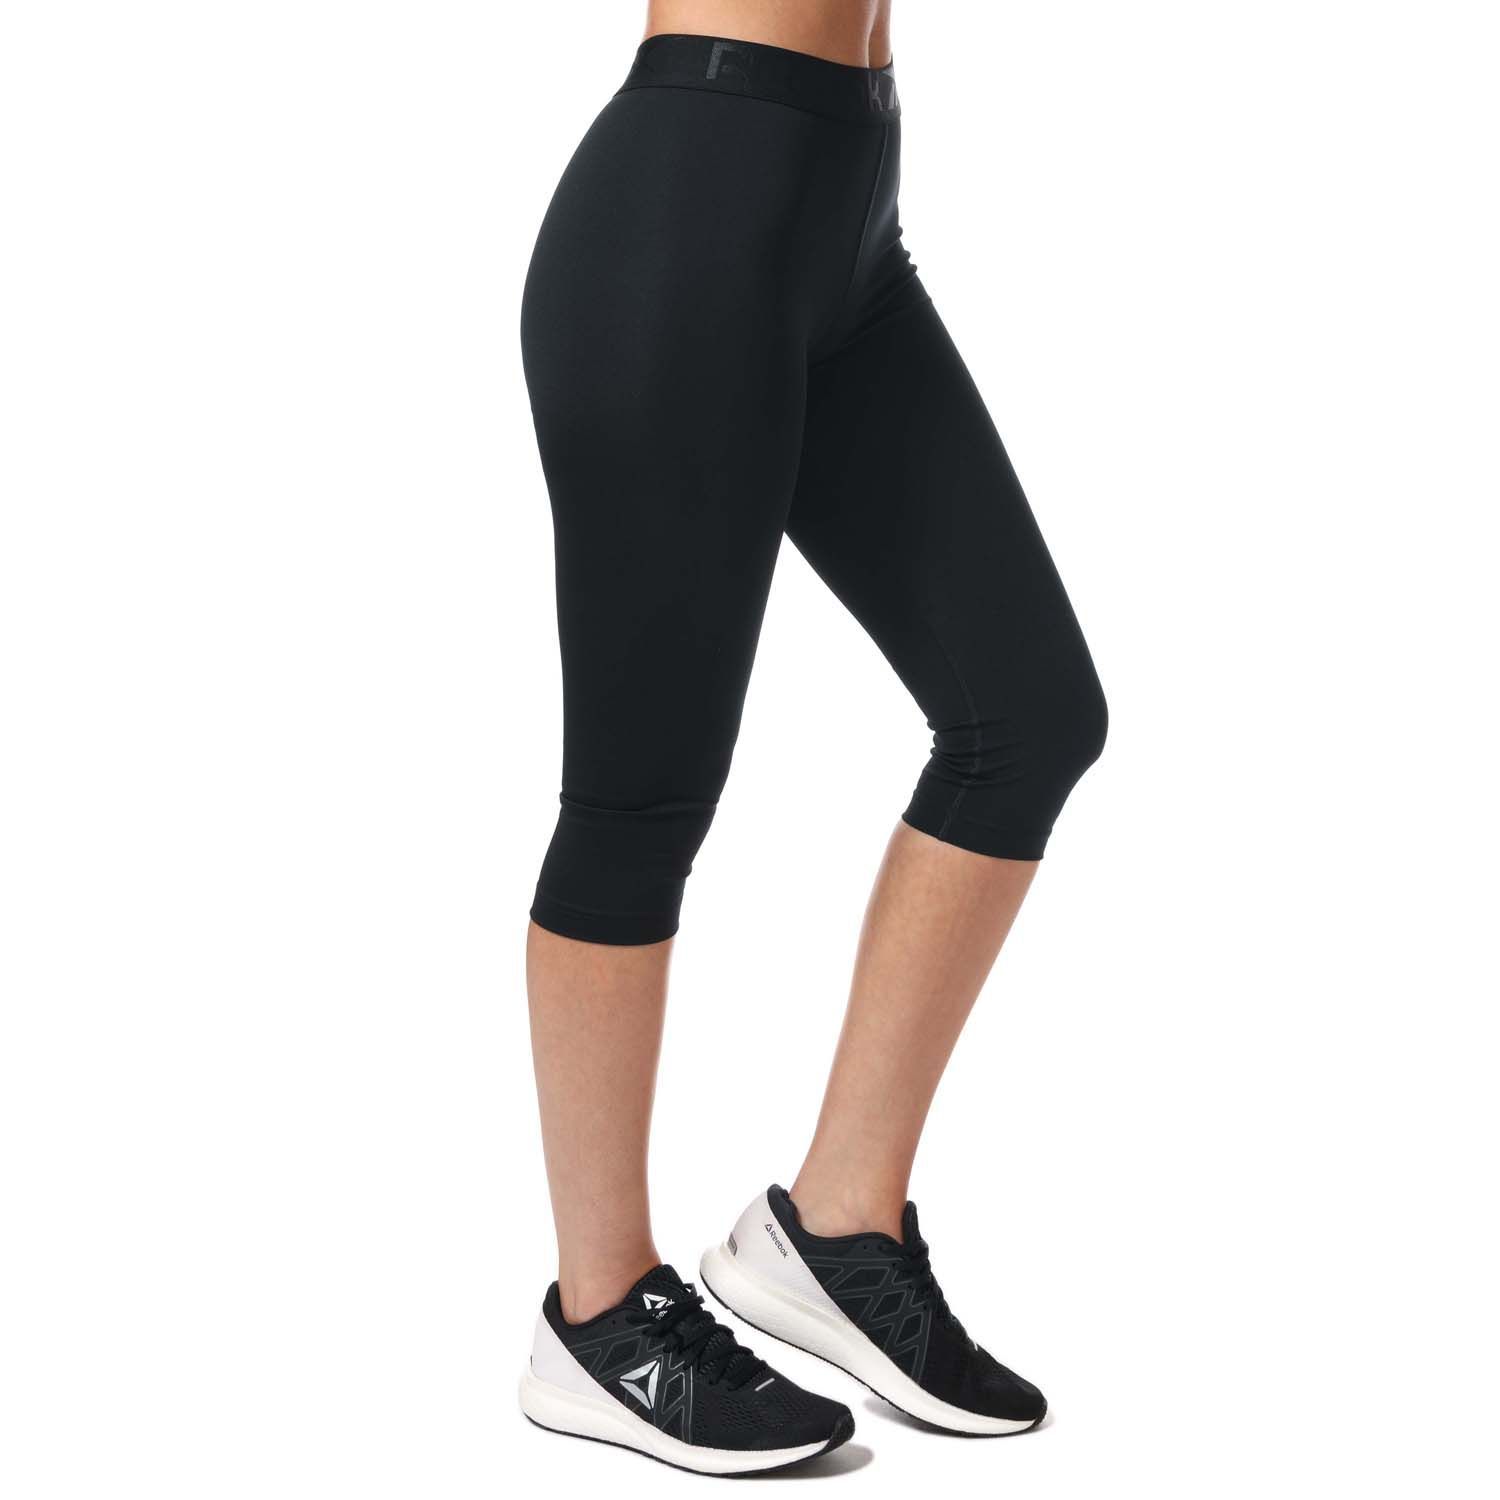 Womens Reebok Workout Ready Capri Tights in black.- Wide waistband and Reebok graphic.- Moisture-wicking fabric.- Reebok branding.- Fitted fit.- Main material: 91% Polyester  9% Elastane.  Machine washable. - Ref: FQ0405